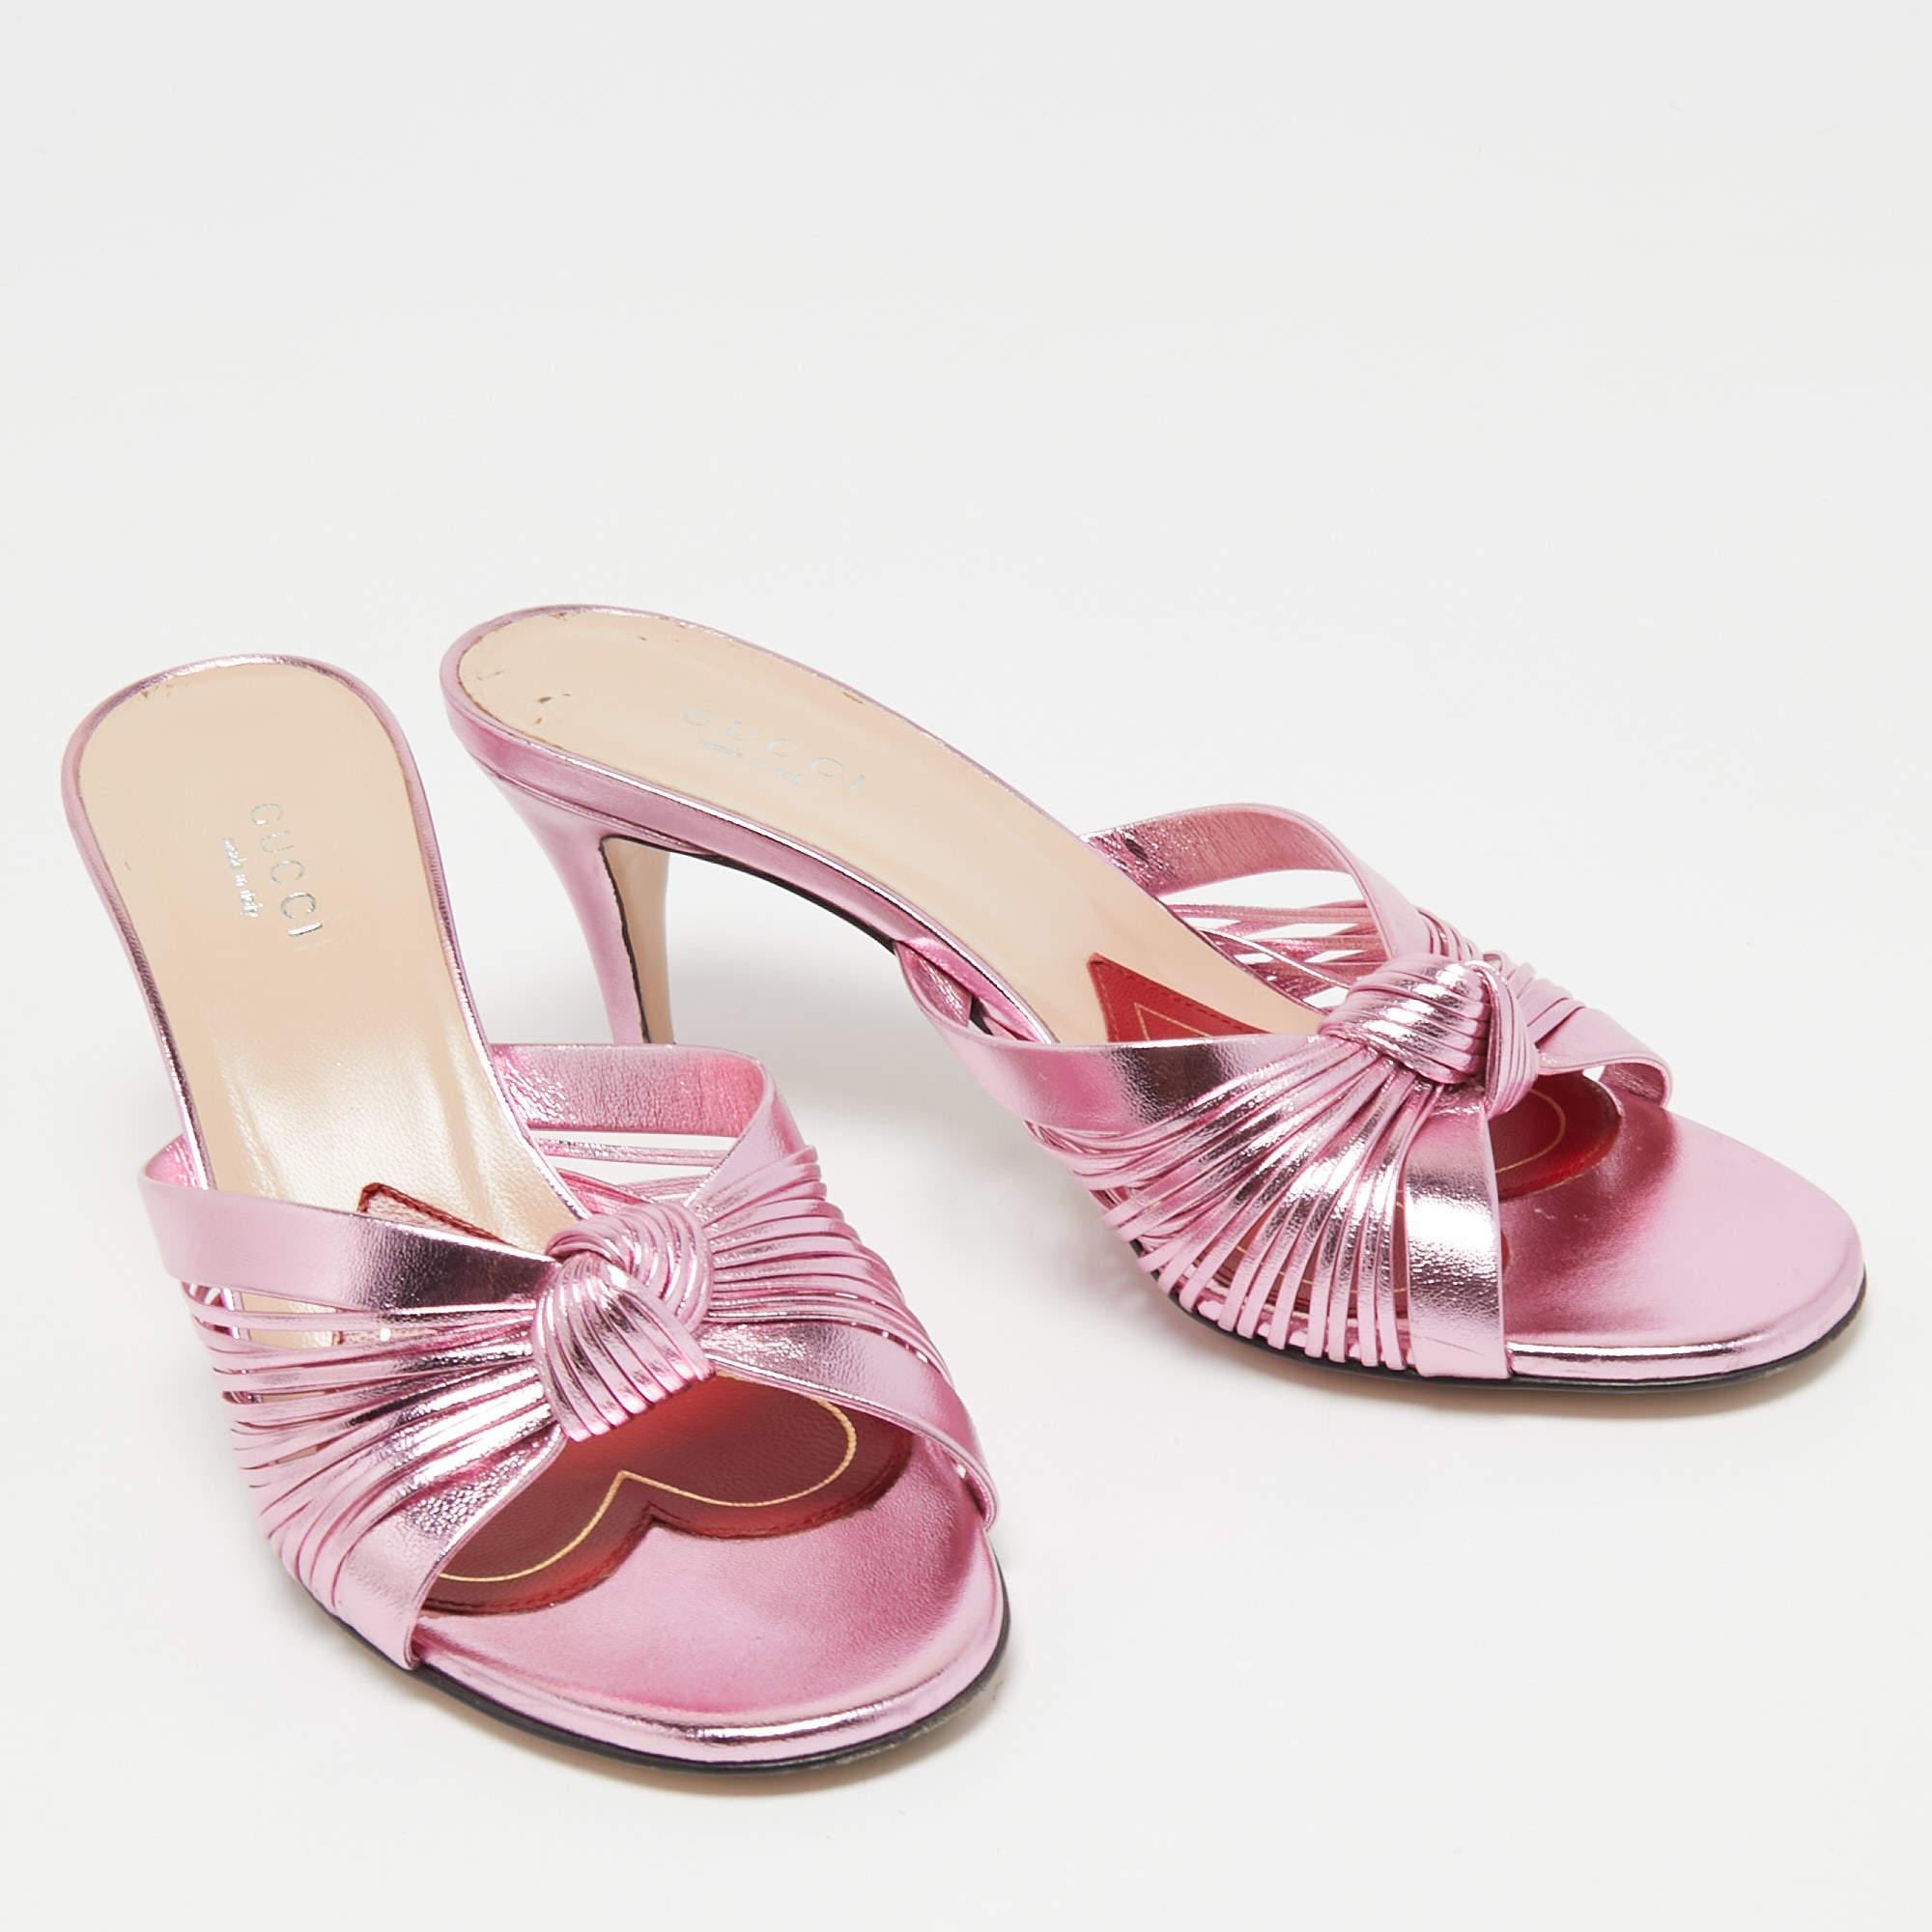 Women's Gucci Metallic Pink Leather Knotted Slide Sandals Size 36.5 For Sale